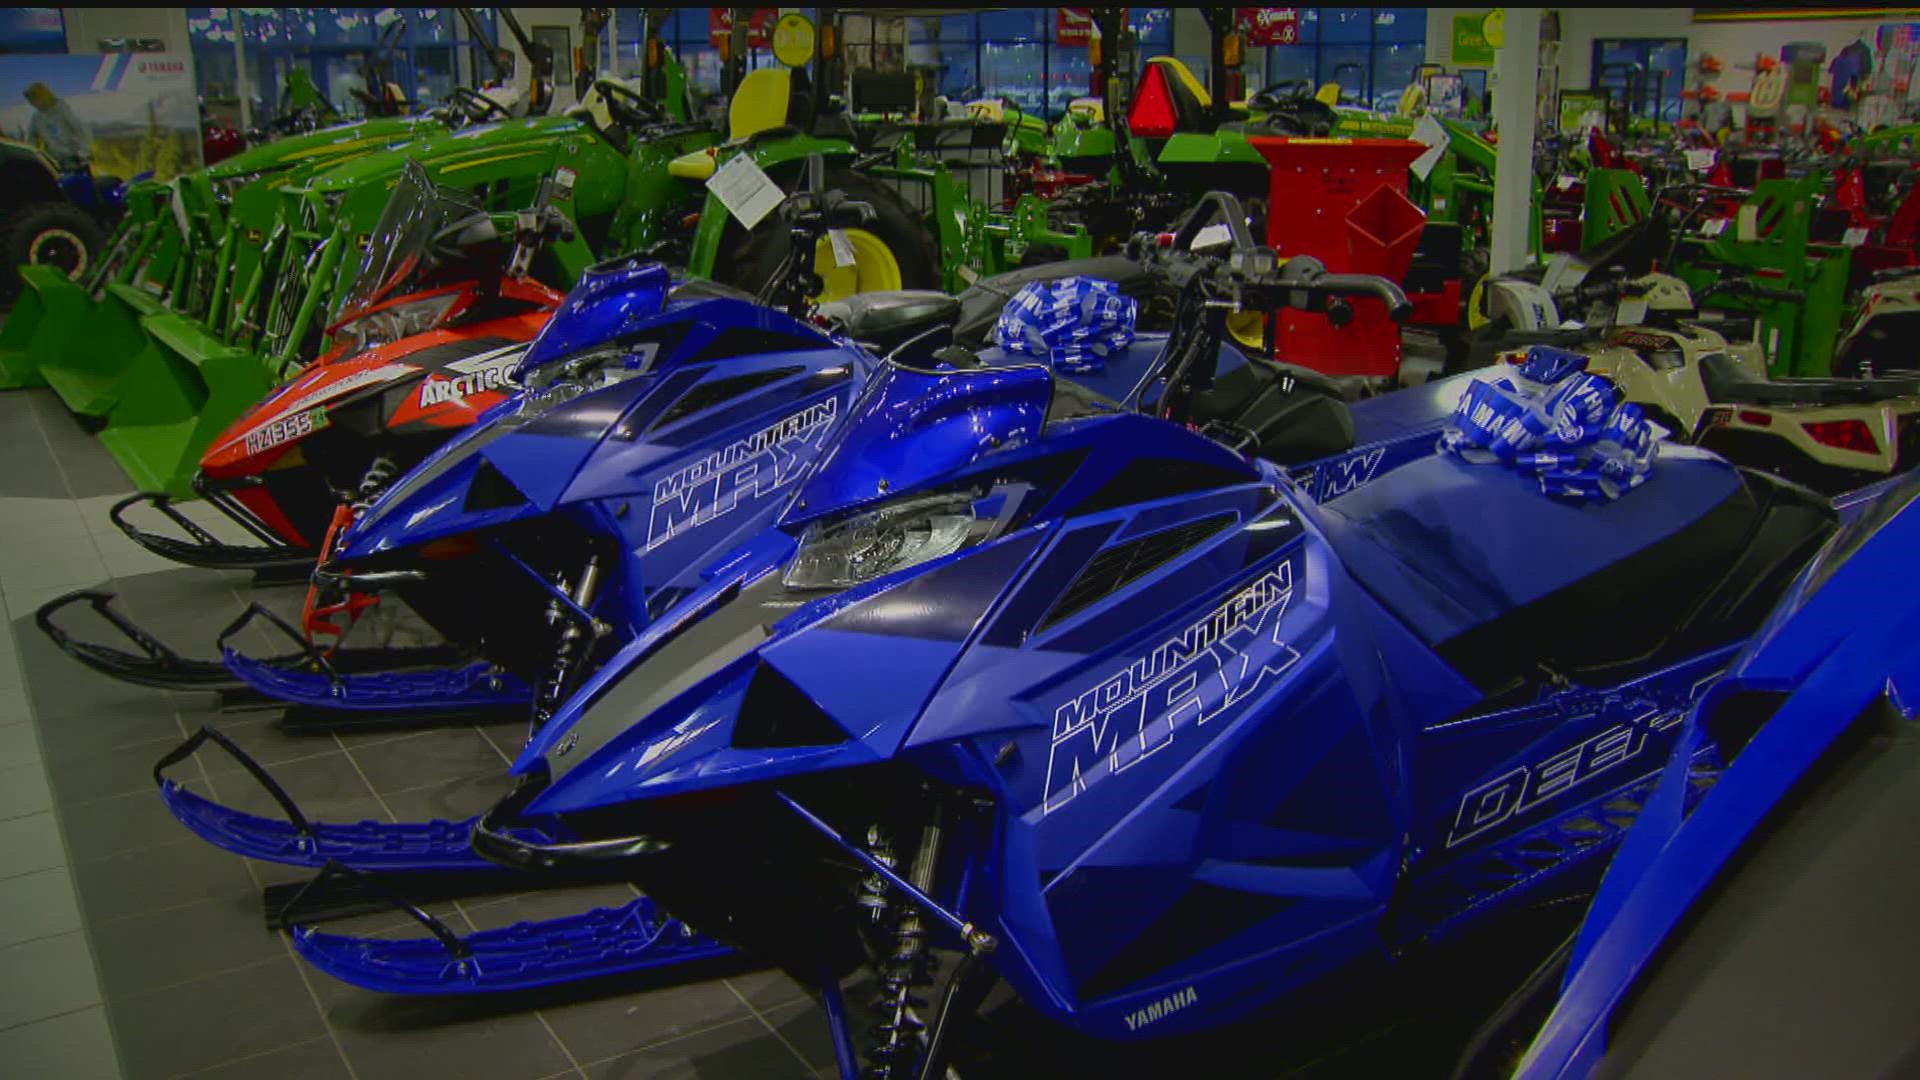 Minnesota requires snowmobile certification by law for anyone born after Dec. 31, 1976.